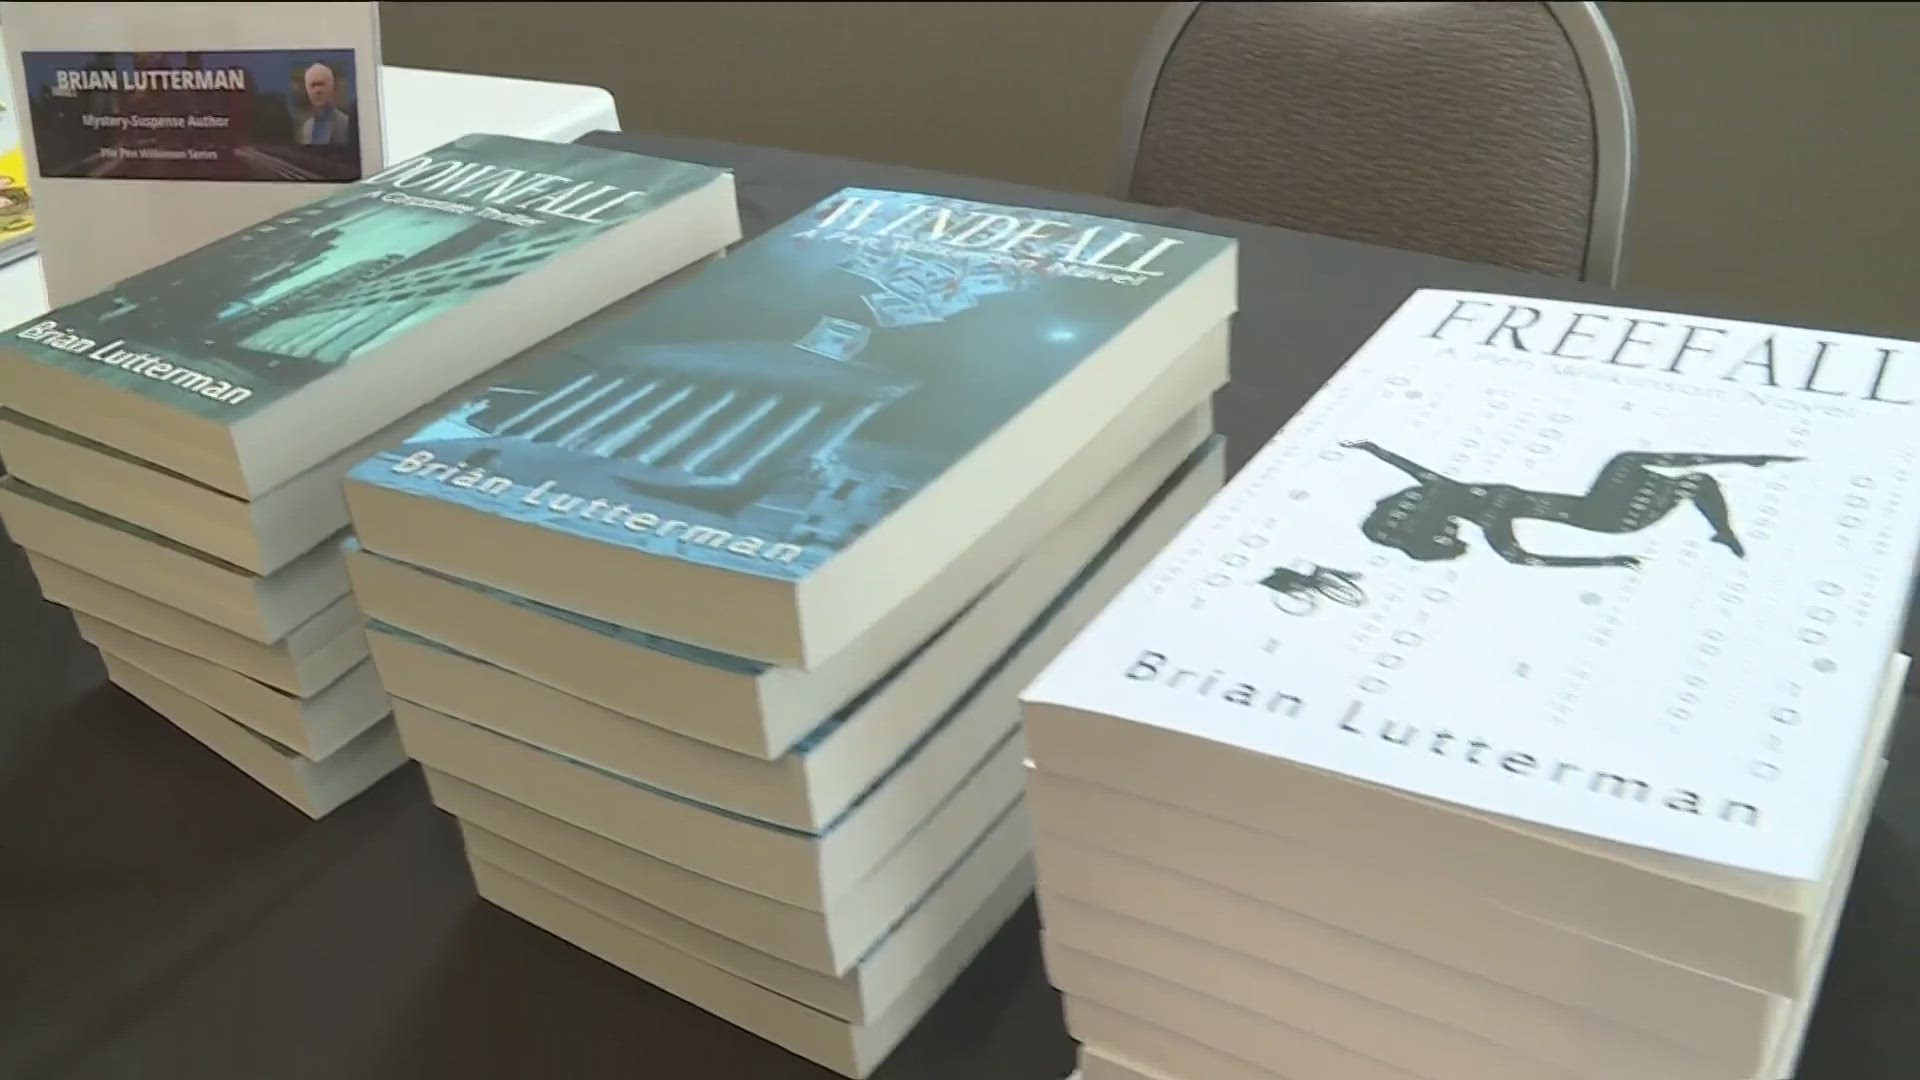 The free book fair features 40 local authors.